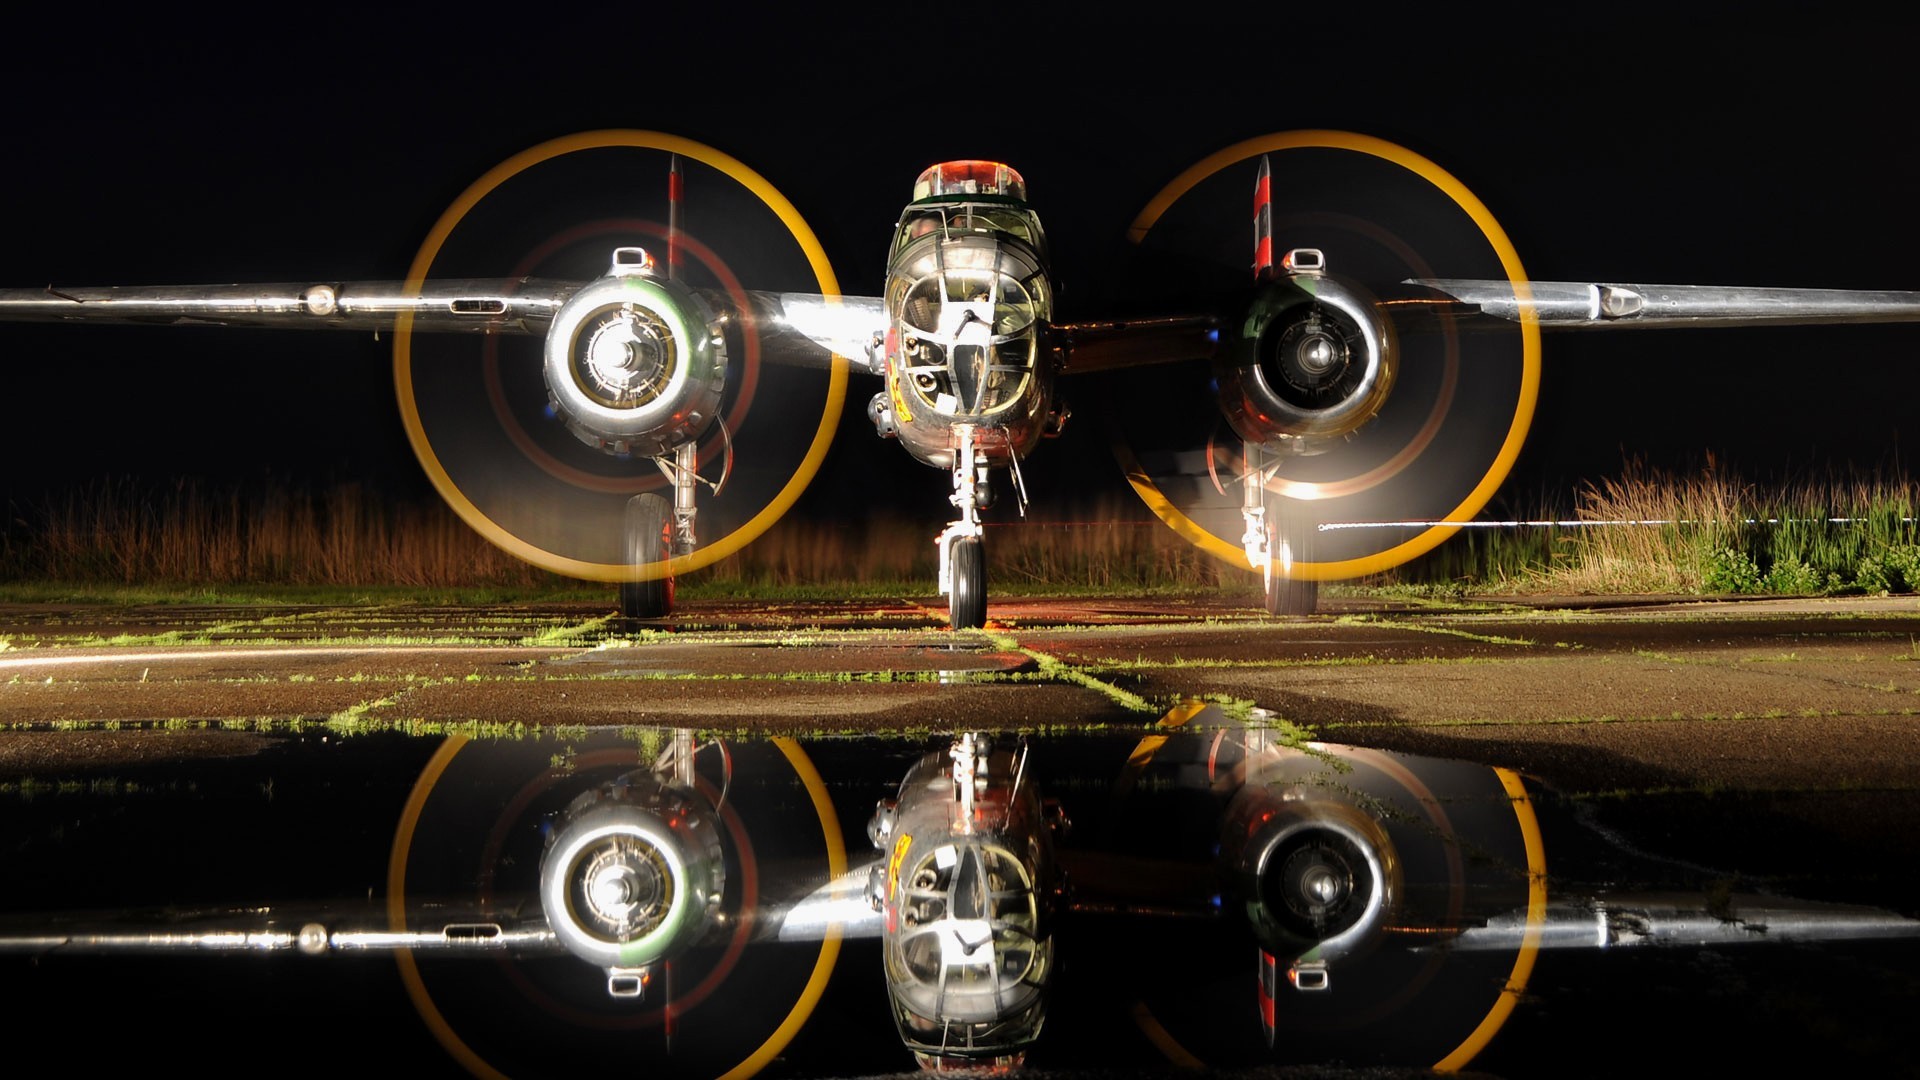 1920x1080 military water reflection wallpaper |  | 27455 | WallpaperUP .